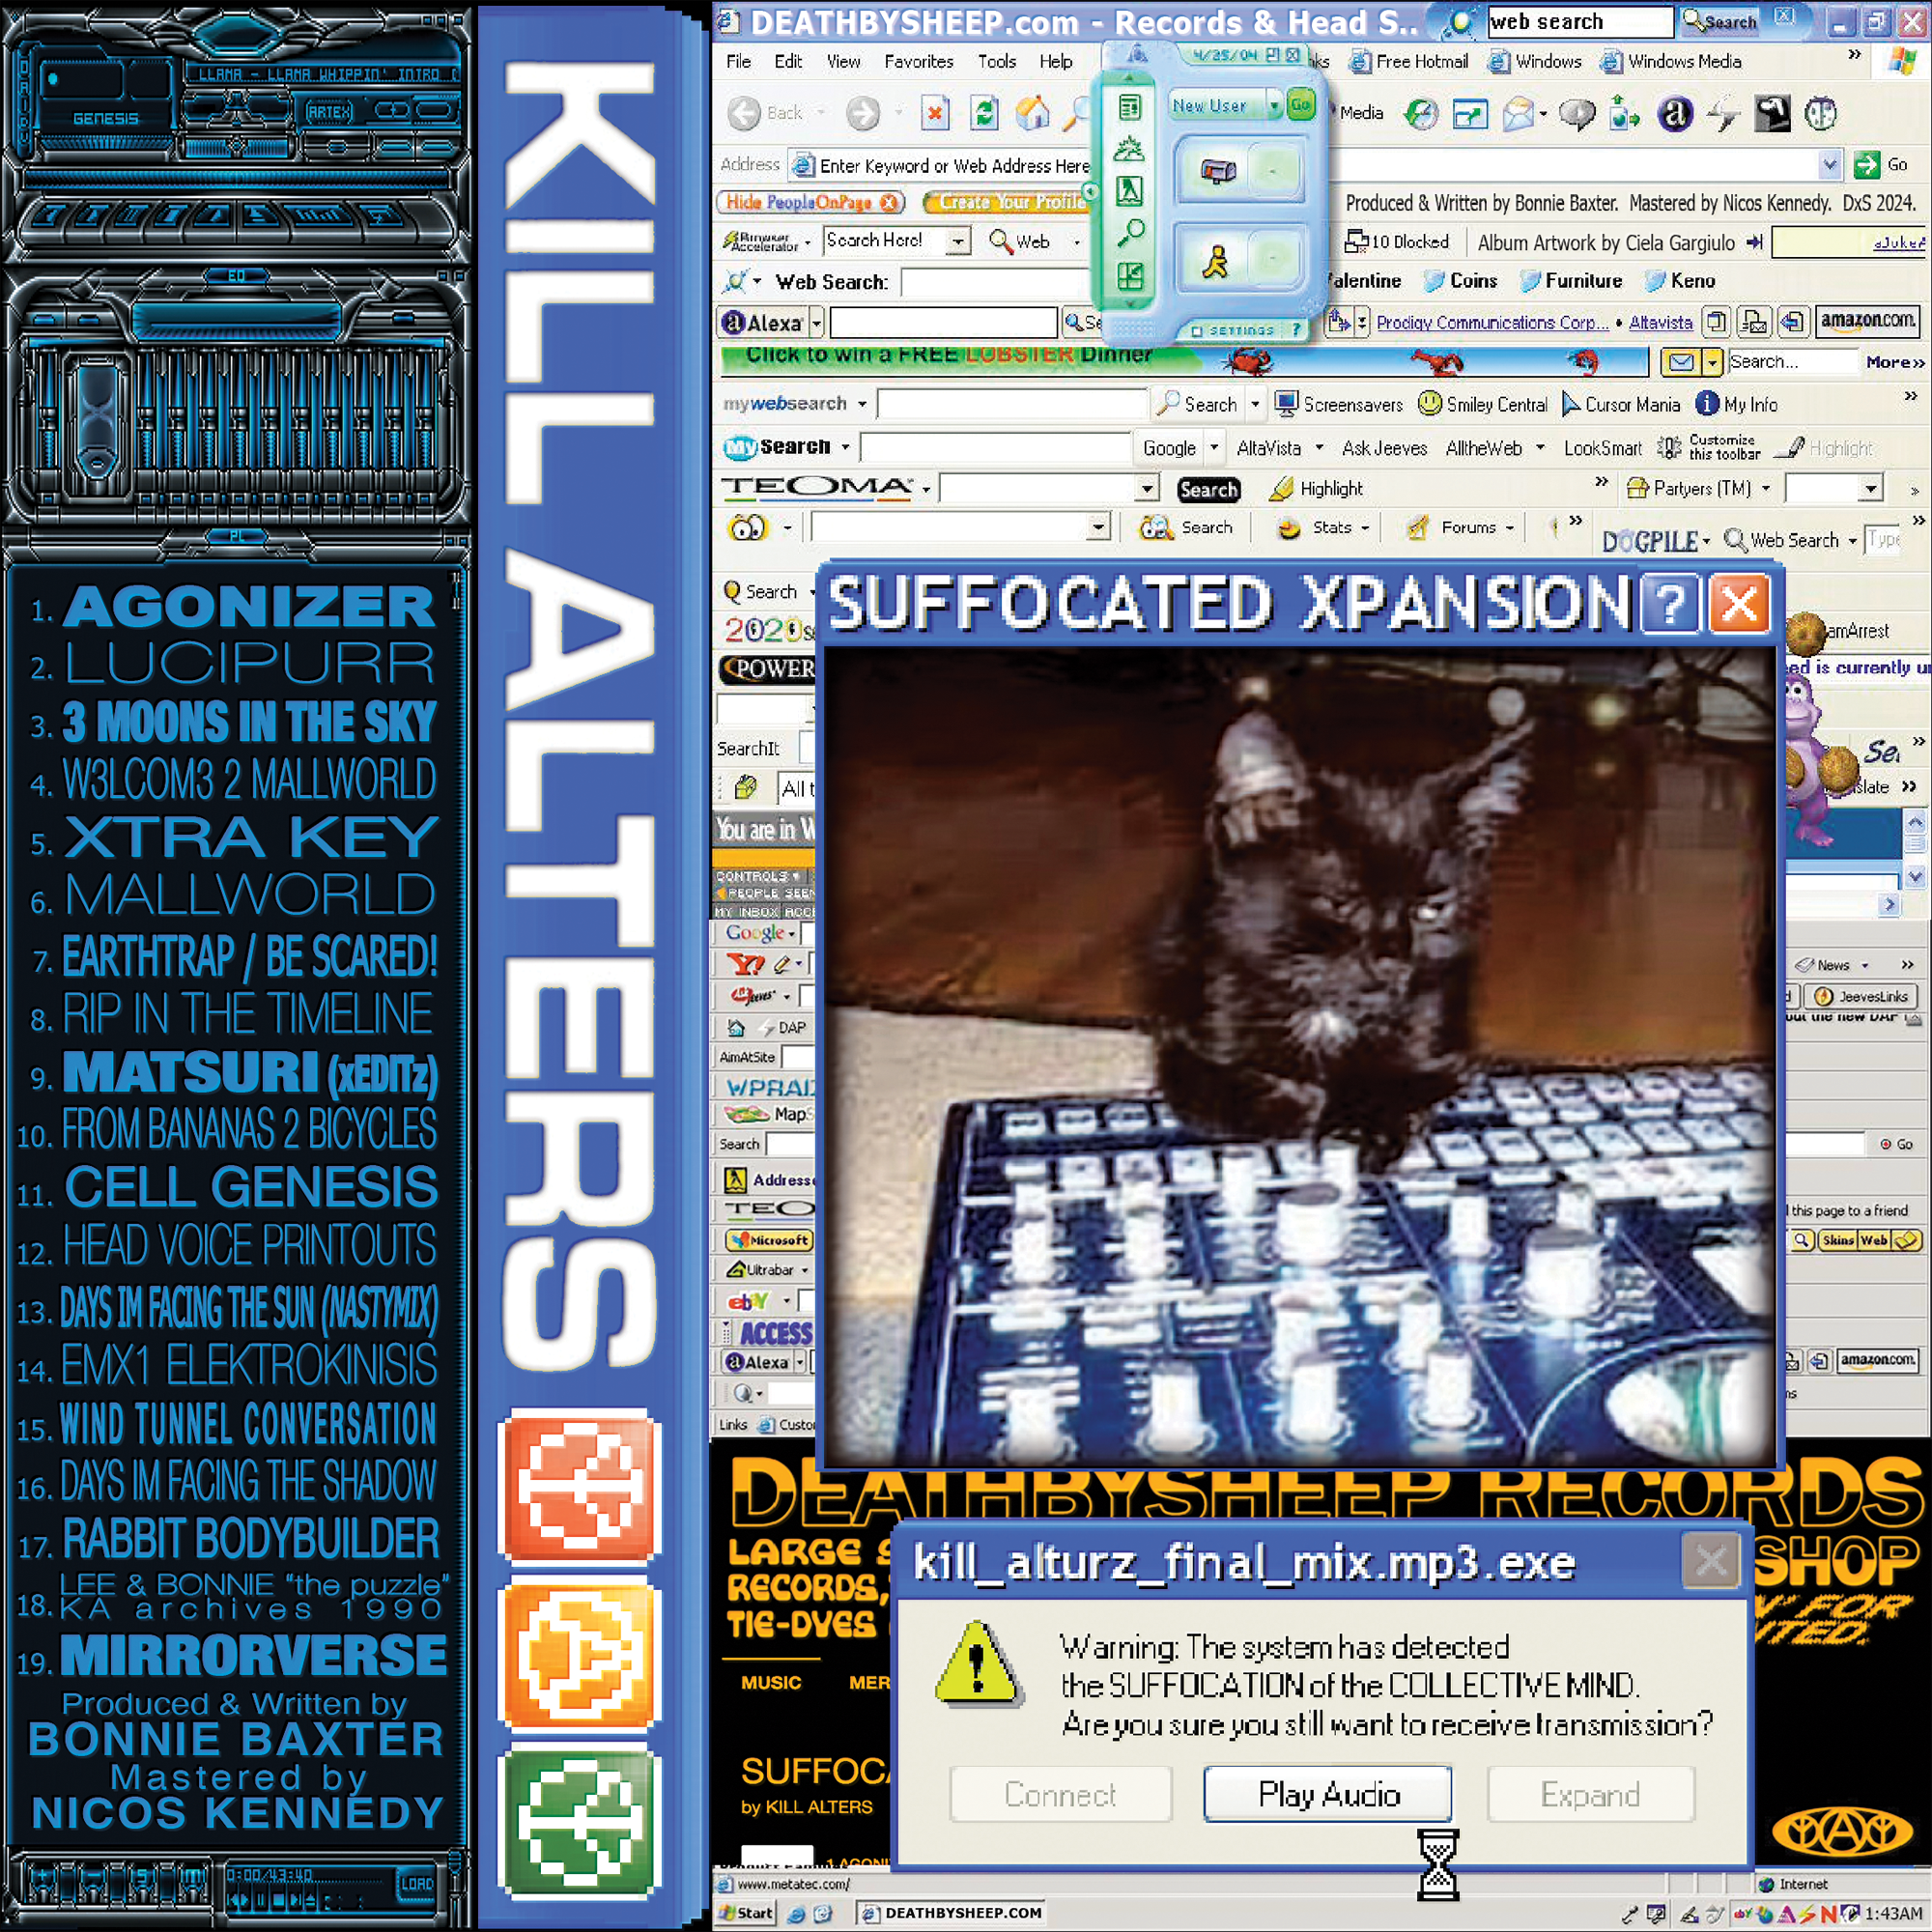 the cover art for the mixtape 'SUFFOCATED XPANSION' by Kill Alters